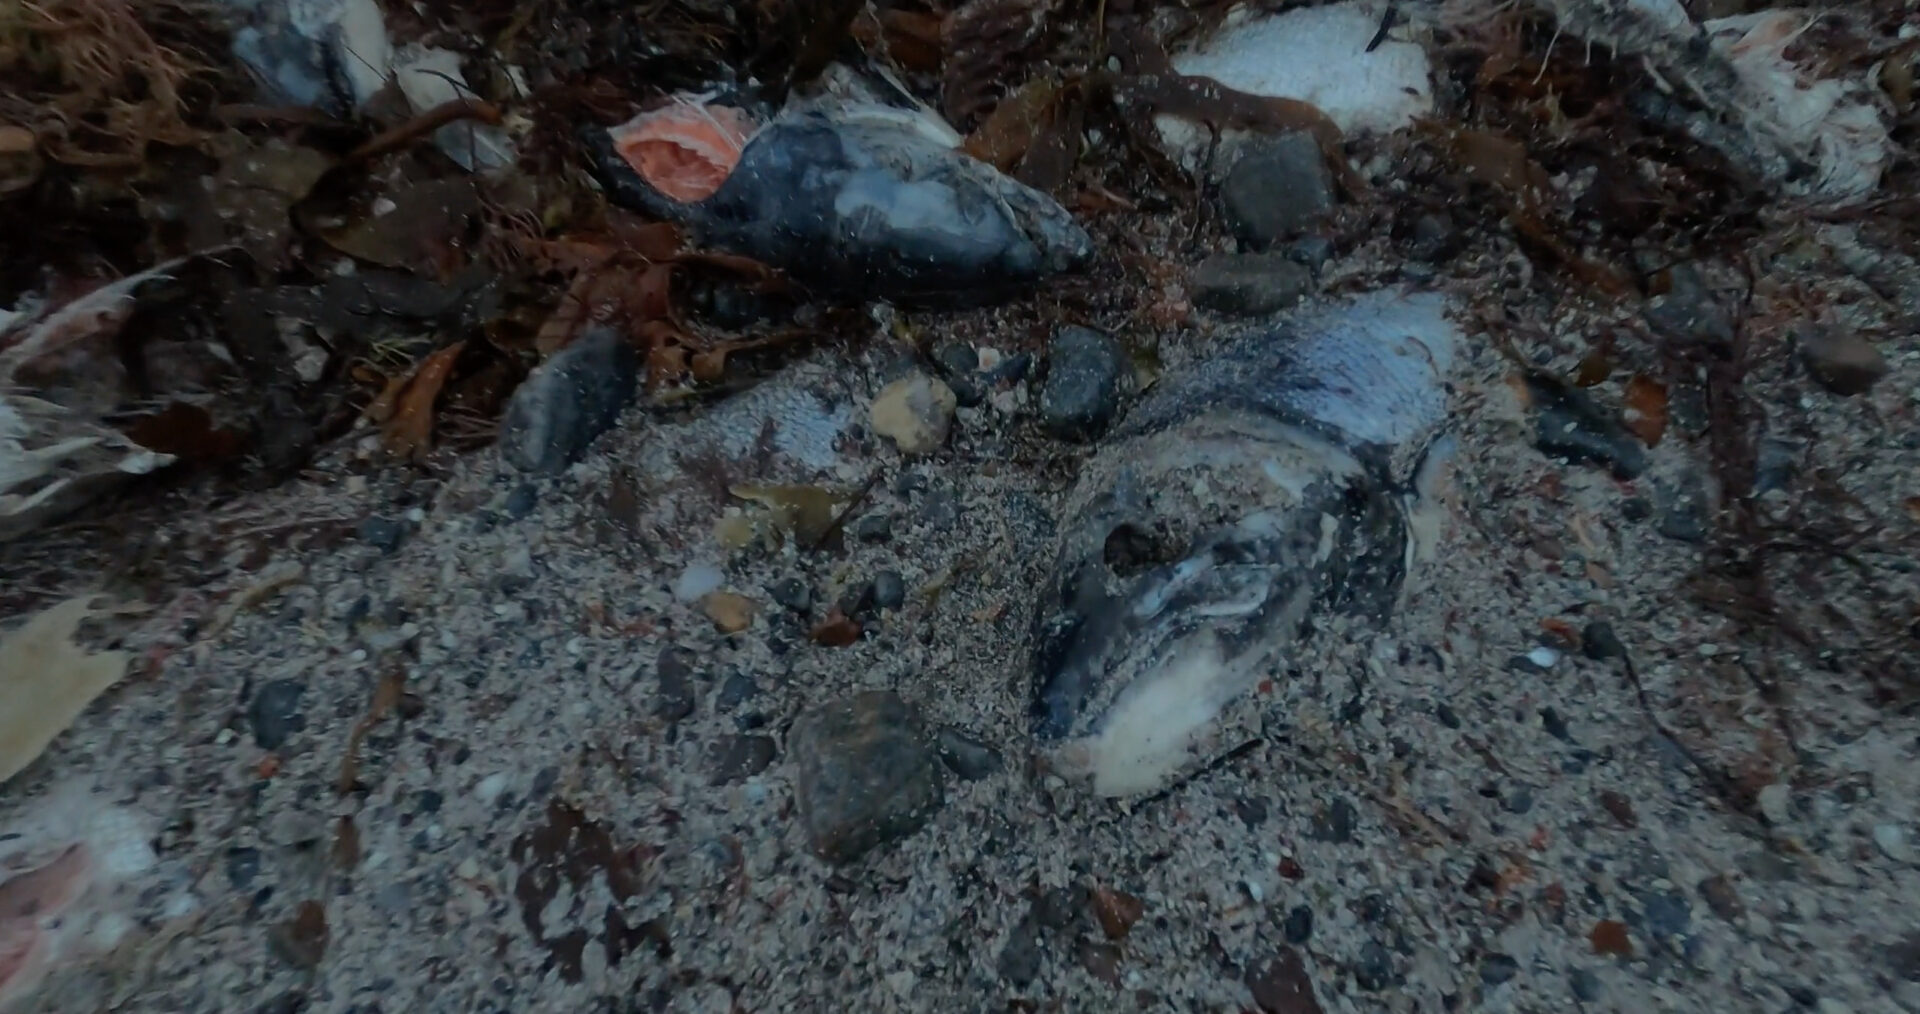 'Illegal' dumping of dead fish in Outer Hebrides continues despite ban vow 3